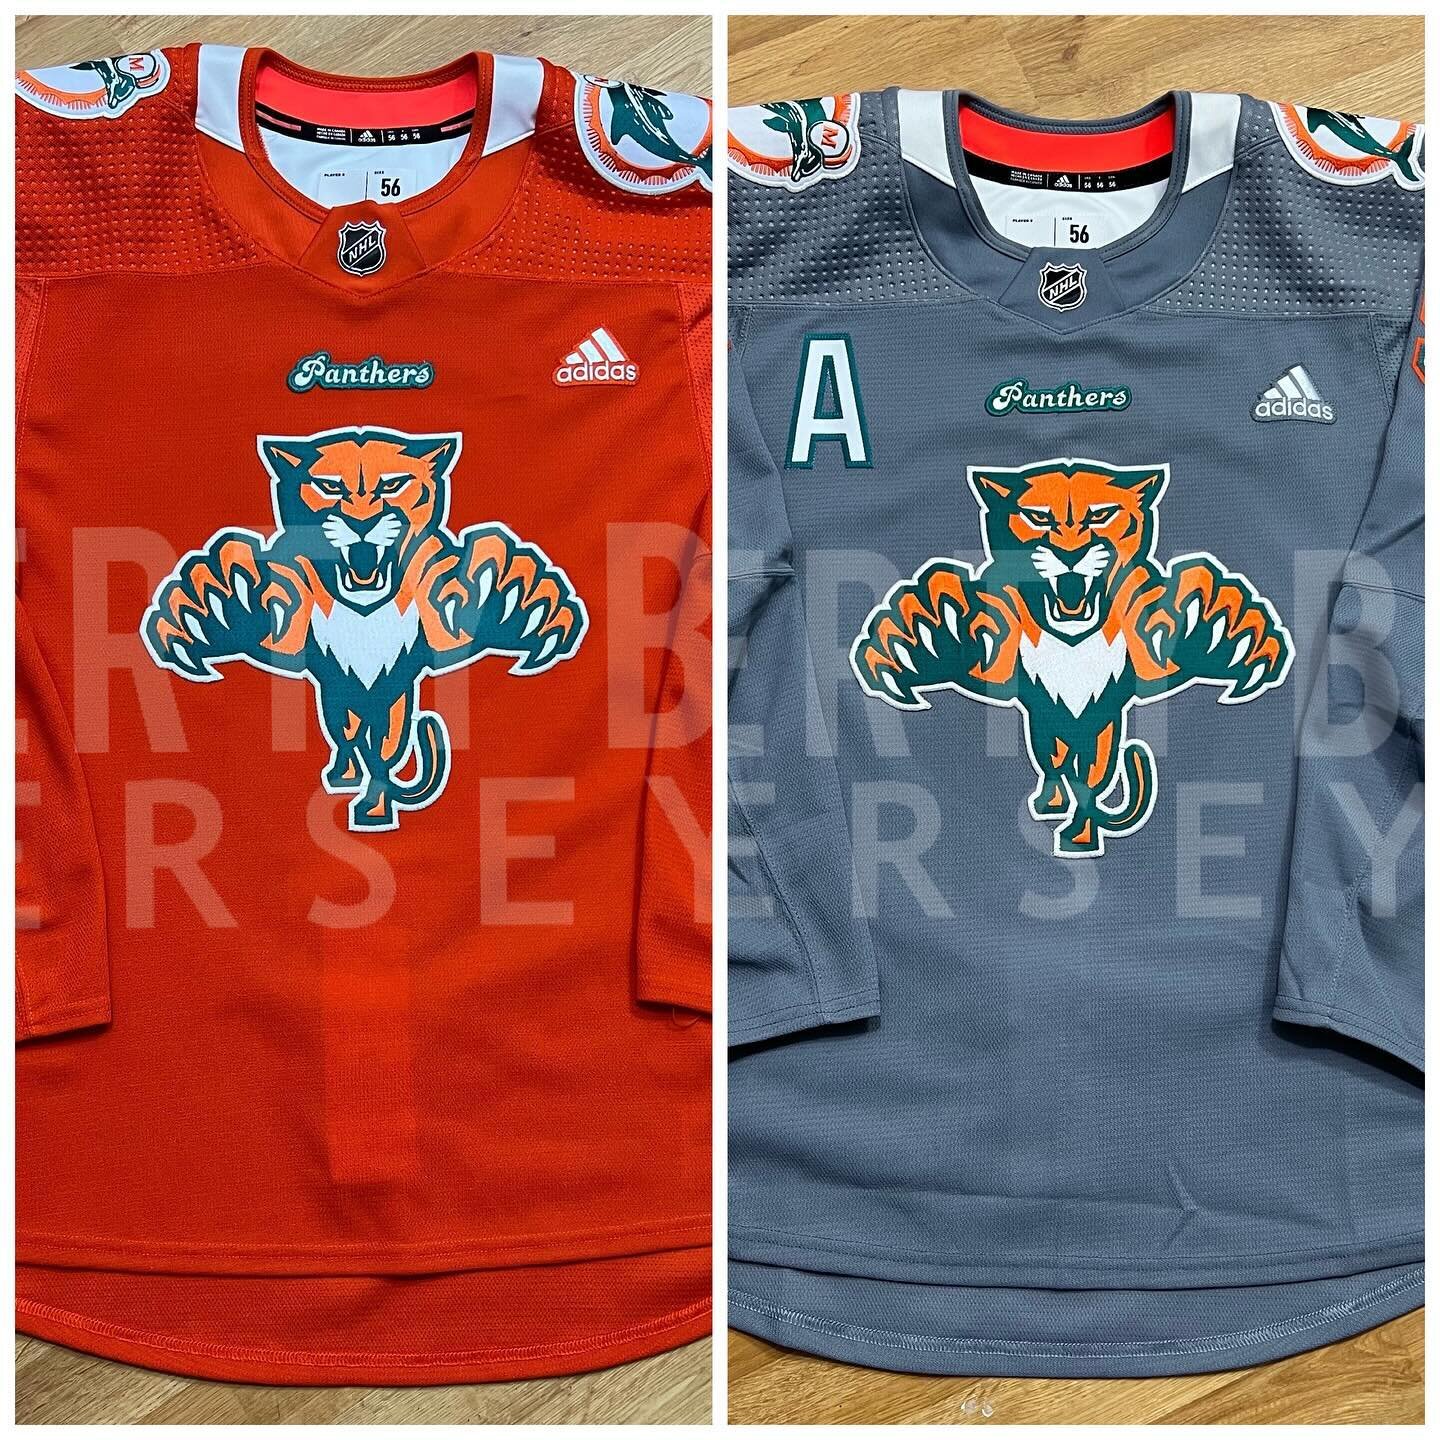 We&rsquo;ve got some #finsup #timetohunt double trouble in Liberty Bell Jerseys today! Just finished up the fraternal twins set of @flapanthers x @miamidolphins mashup jerseys, right in time for the playoffs. Both feature fully embroidered crests and